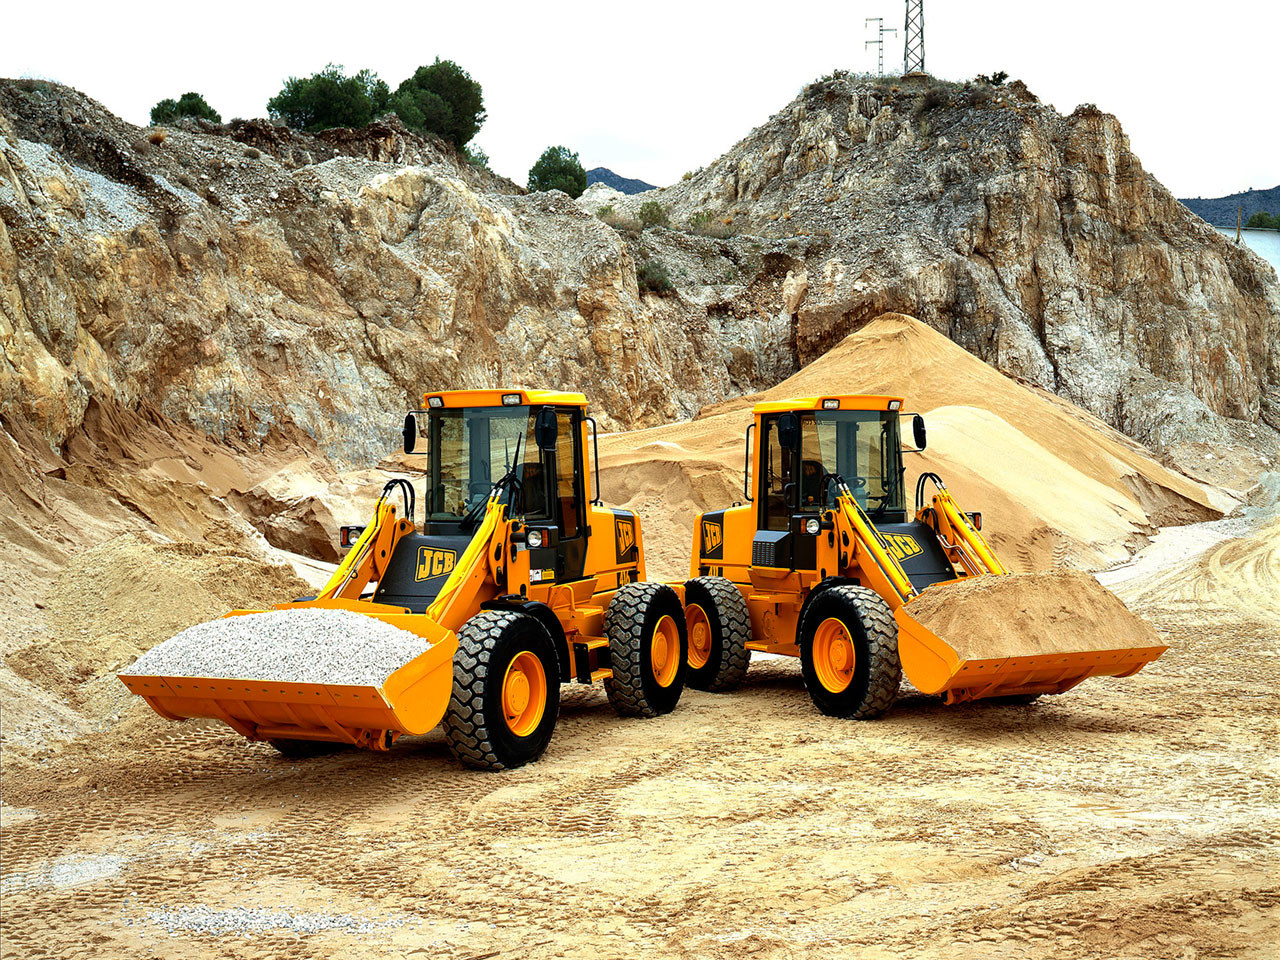 JCB nelle pagine della storia 1680x1050_1558611346_1994---a-new-range-of-machines-with-rear-mounted-cabs-including-the-411-and-416-was-introduced